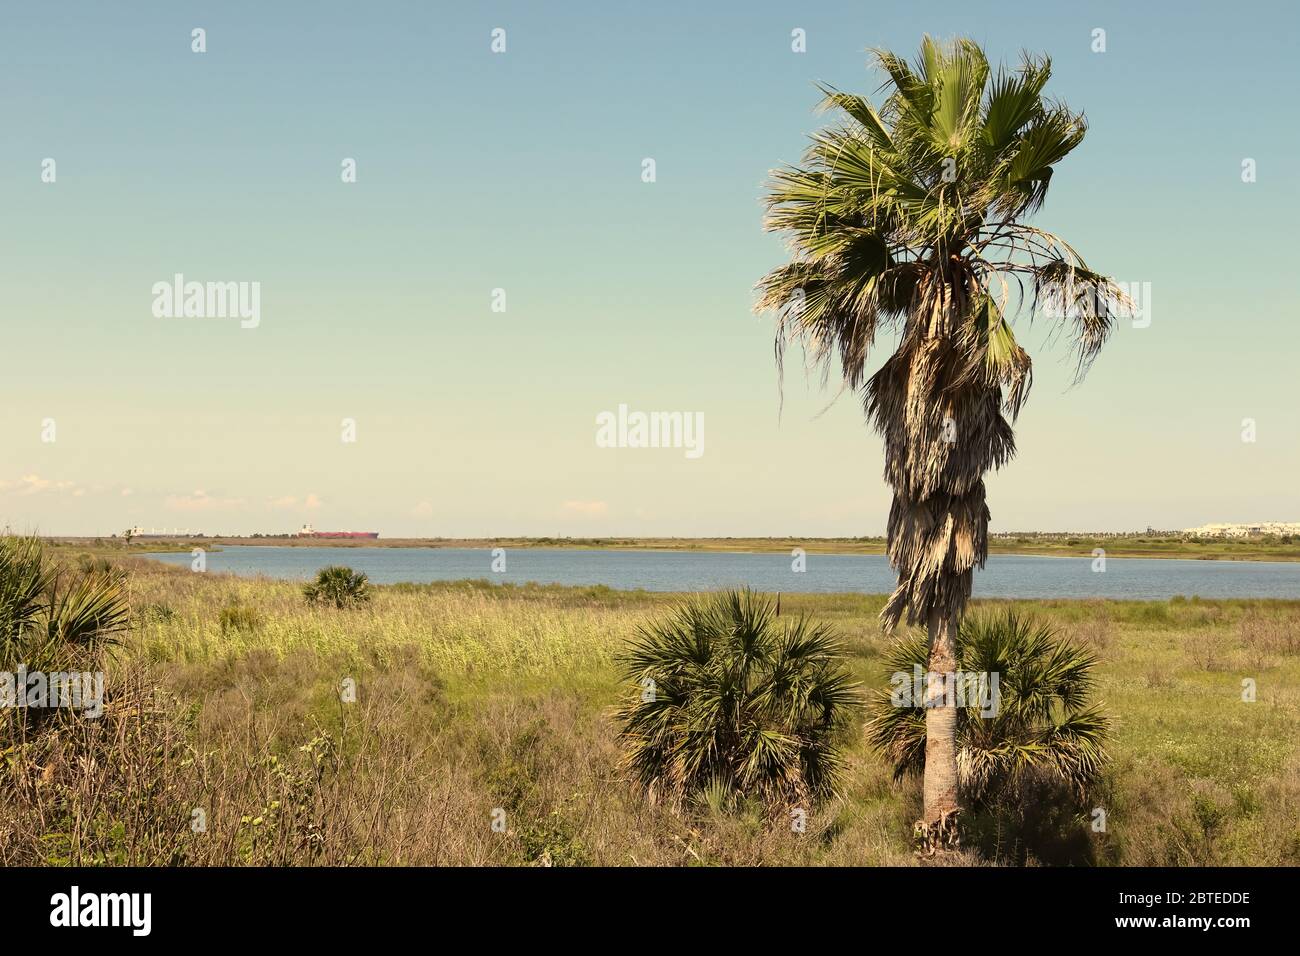 Nature landscape on Galveston Island, Texas, USA. A palm tree, the blue water of the lagoon and container ships in the far distance. Stock Photo